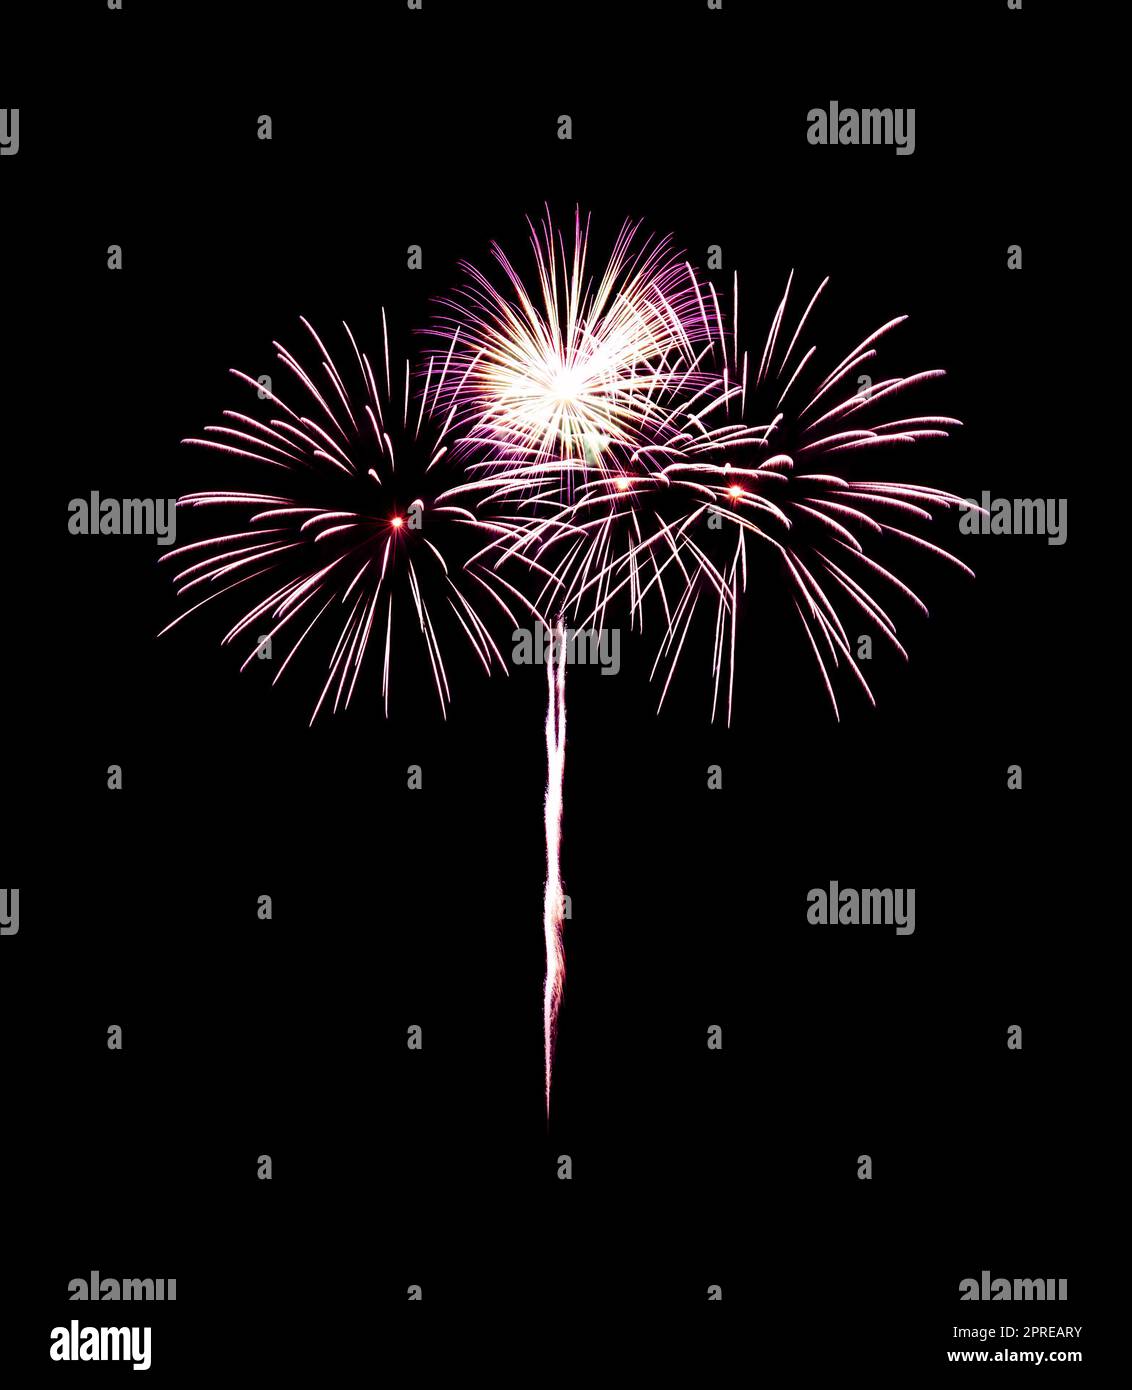 Beautiful colorful fireworks exploding in the night sky, isolated on black background. New year and anniversary concept. Stock Photo